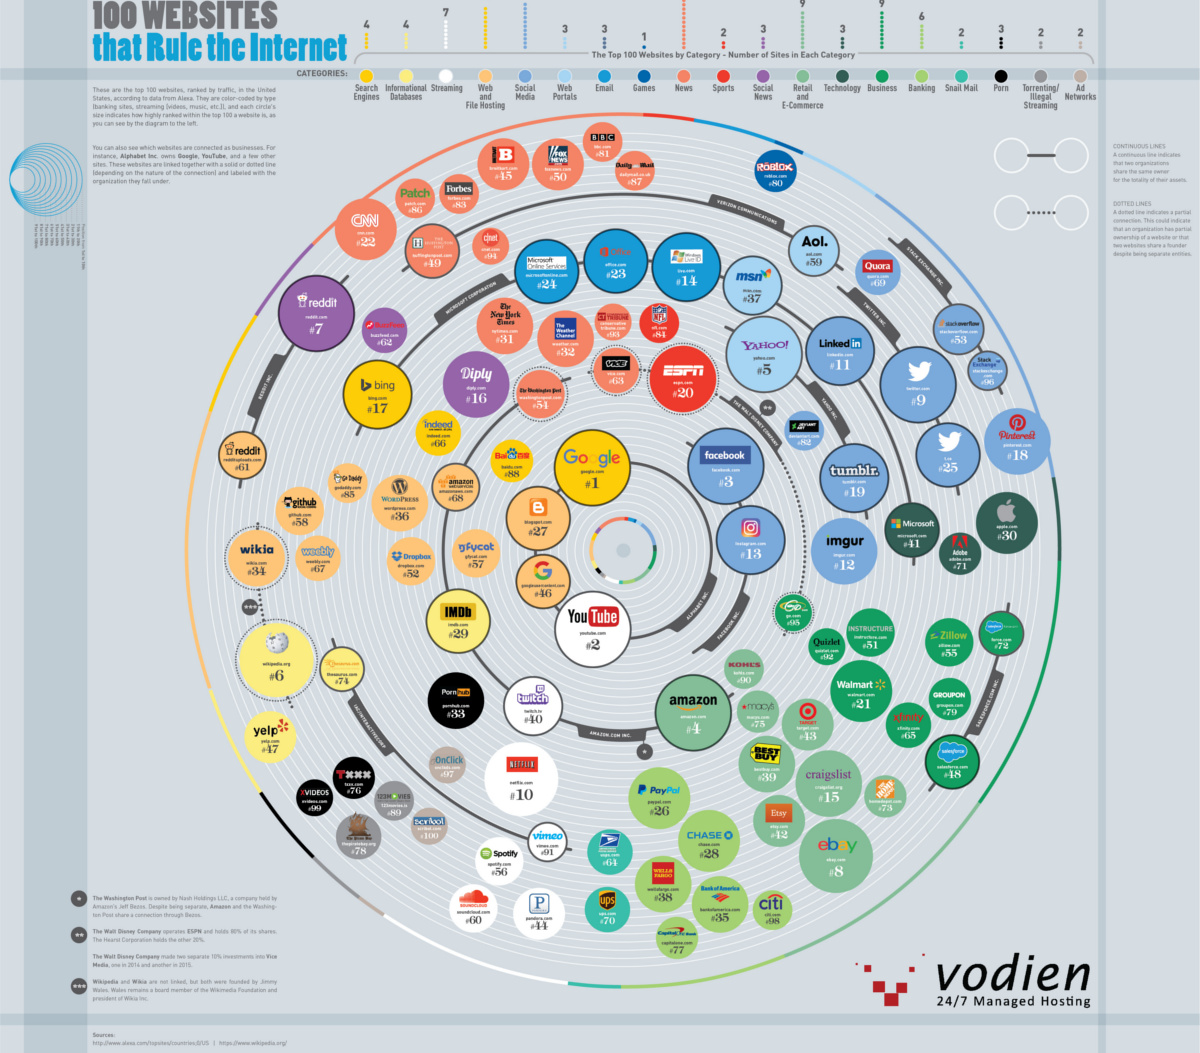 Infographic: The 100 Websites That Rule the Internet